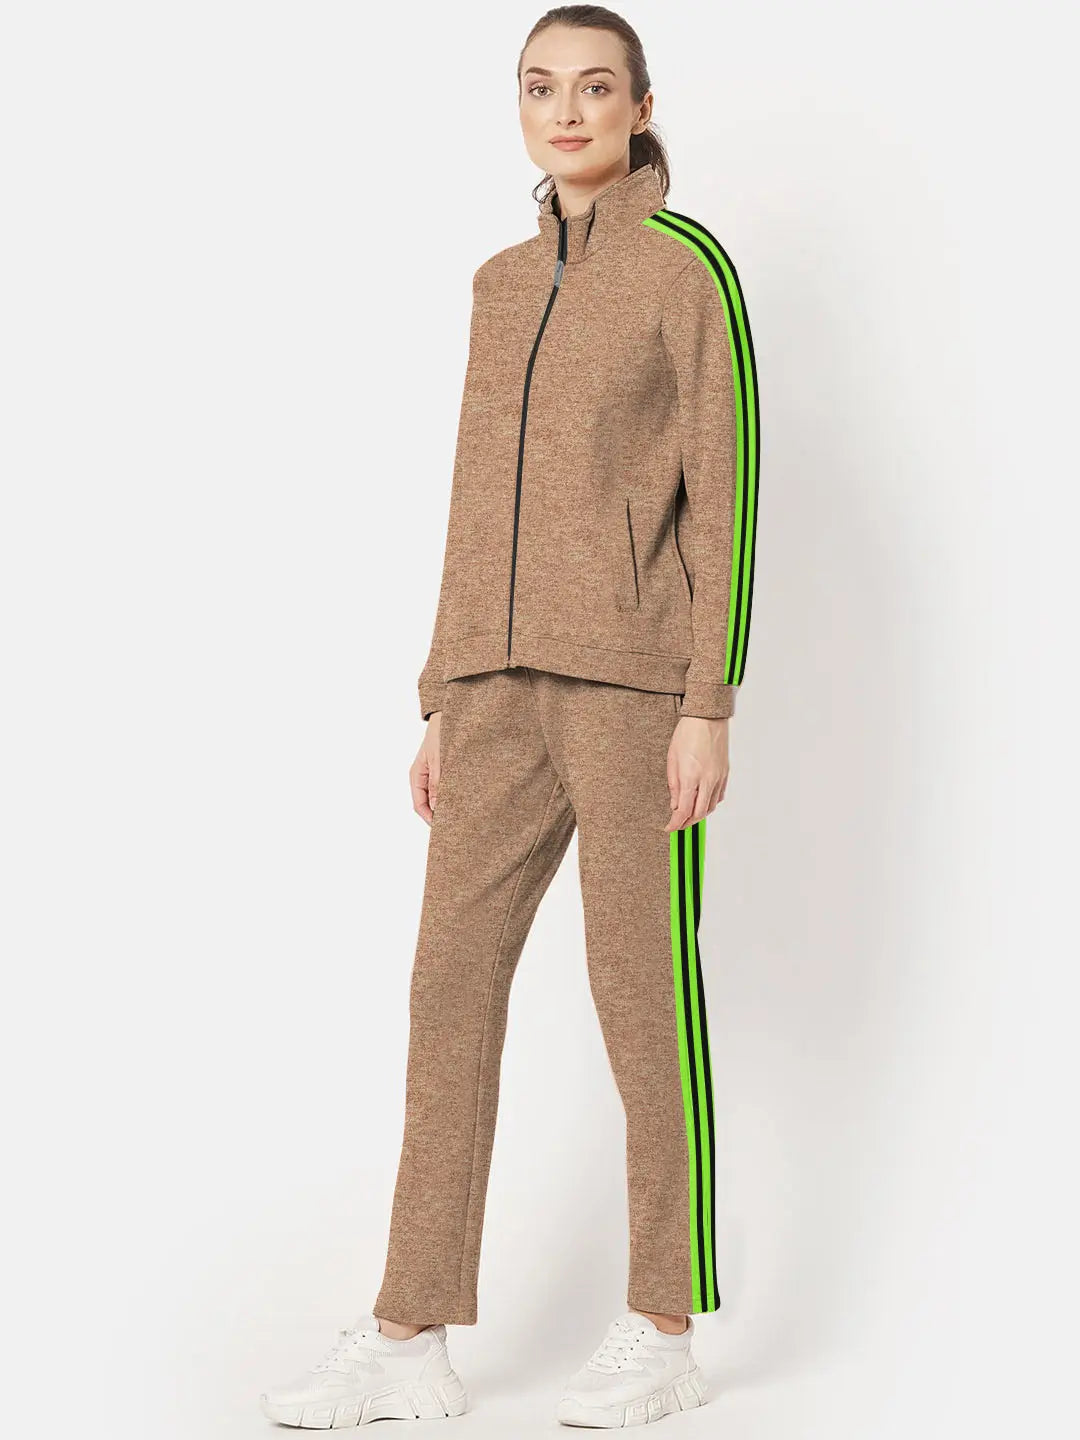 Louis Vicaci Fleece Zipper Tracksuit For Ladies-Brown Melange with Lime Green Stripe-BE17523 Louis Vicaci